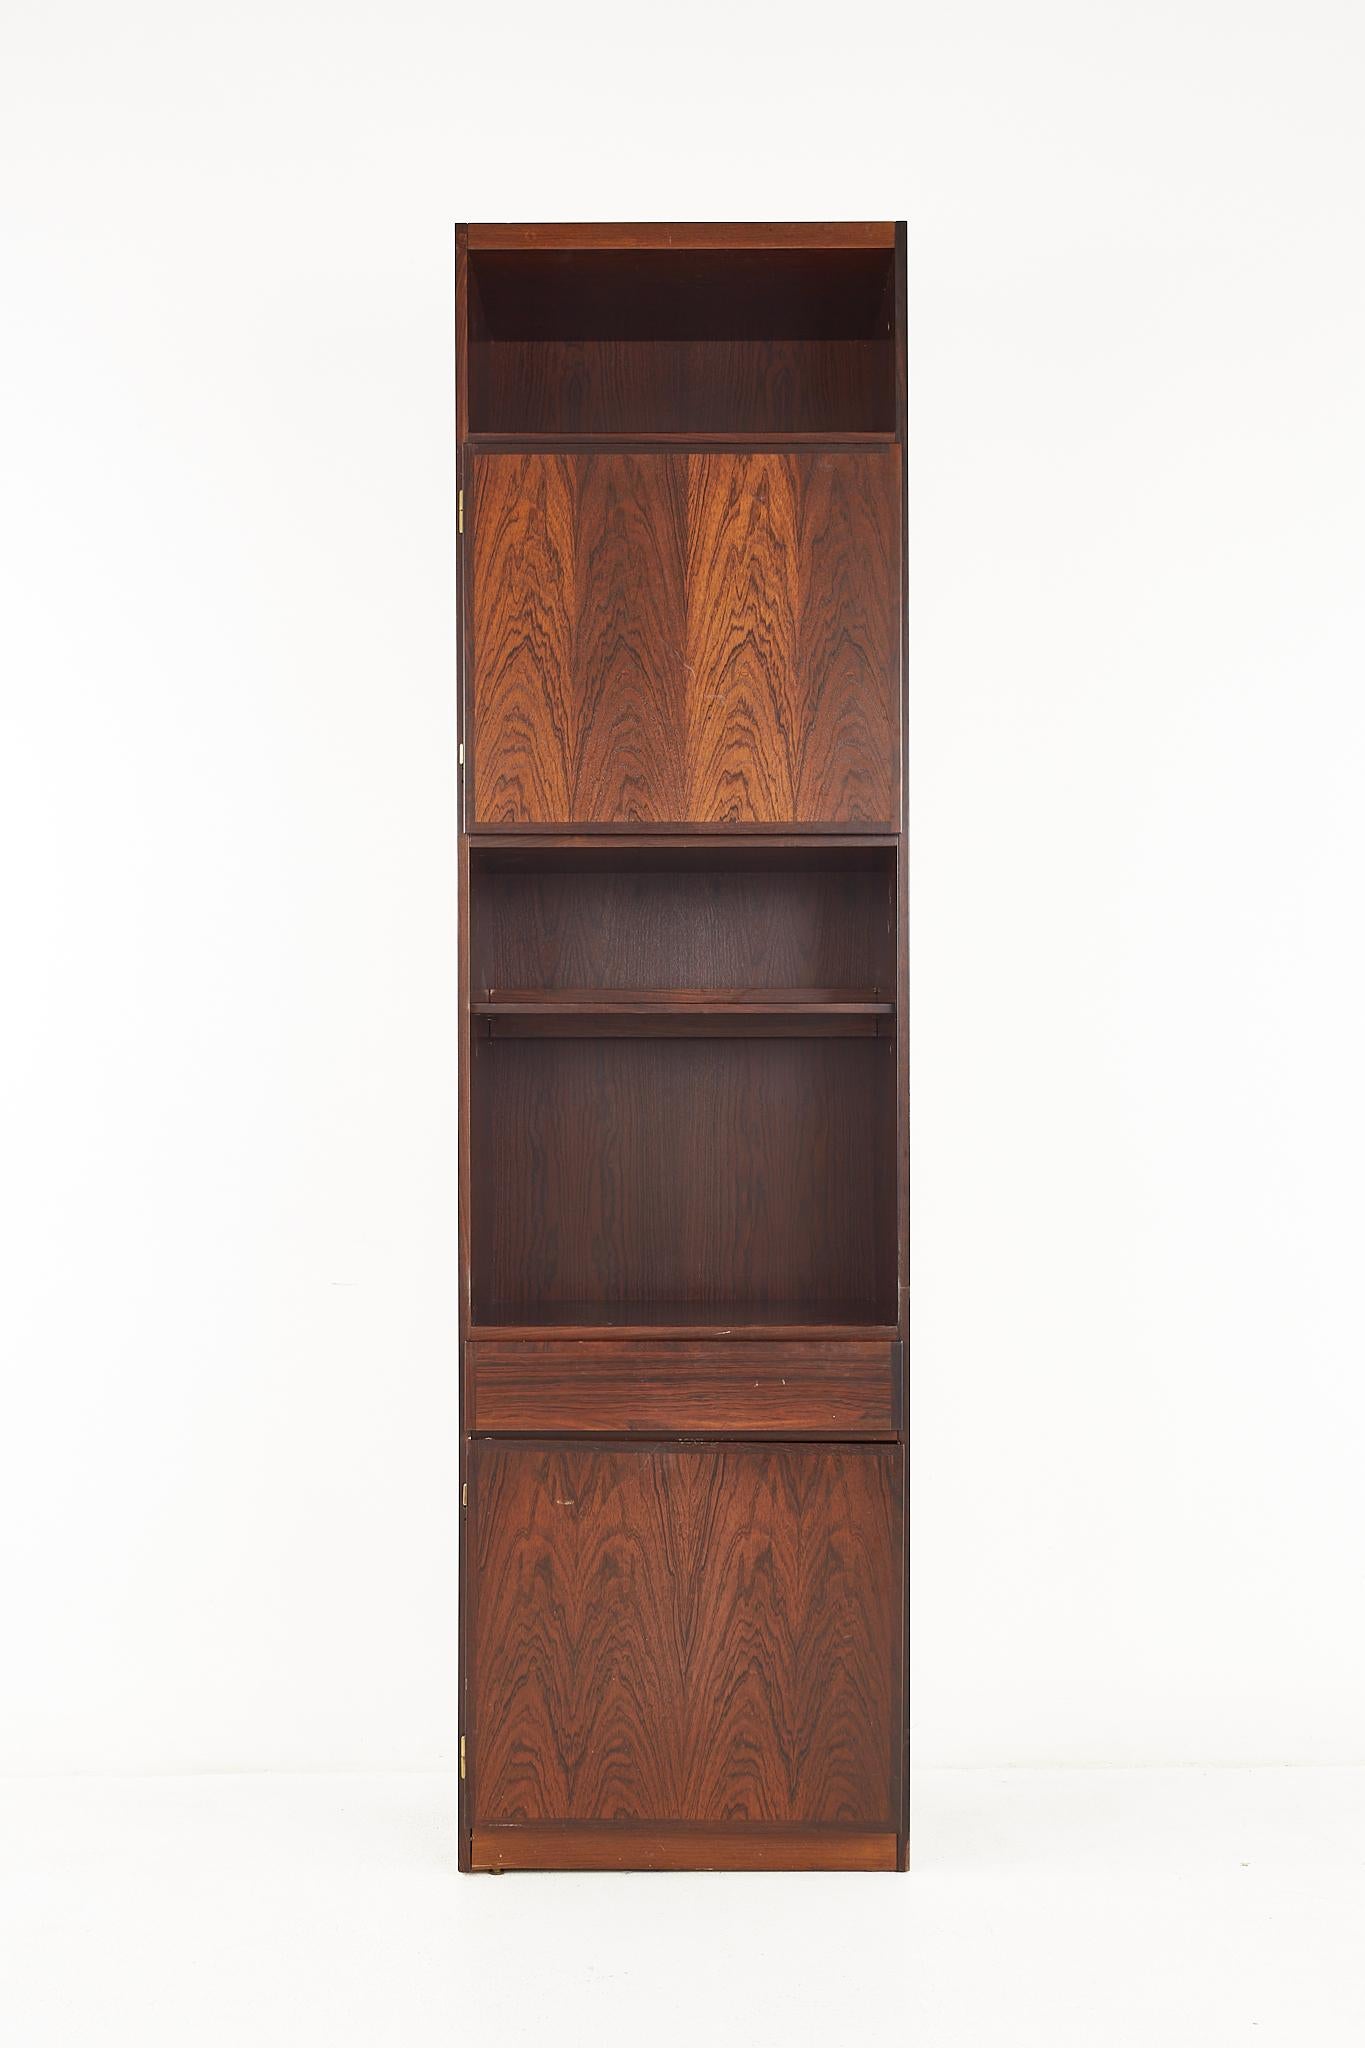 Omann Jun mid century danish rosewood bookcase cabinet

This cabinet measures: 23 wide x 16 deep x 84 inches high

All pieces of furniture can be had in what we call restored vintage condition. That means the piece is restored upon purchase so